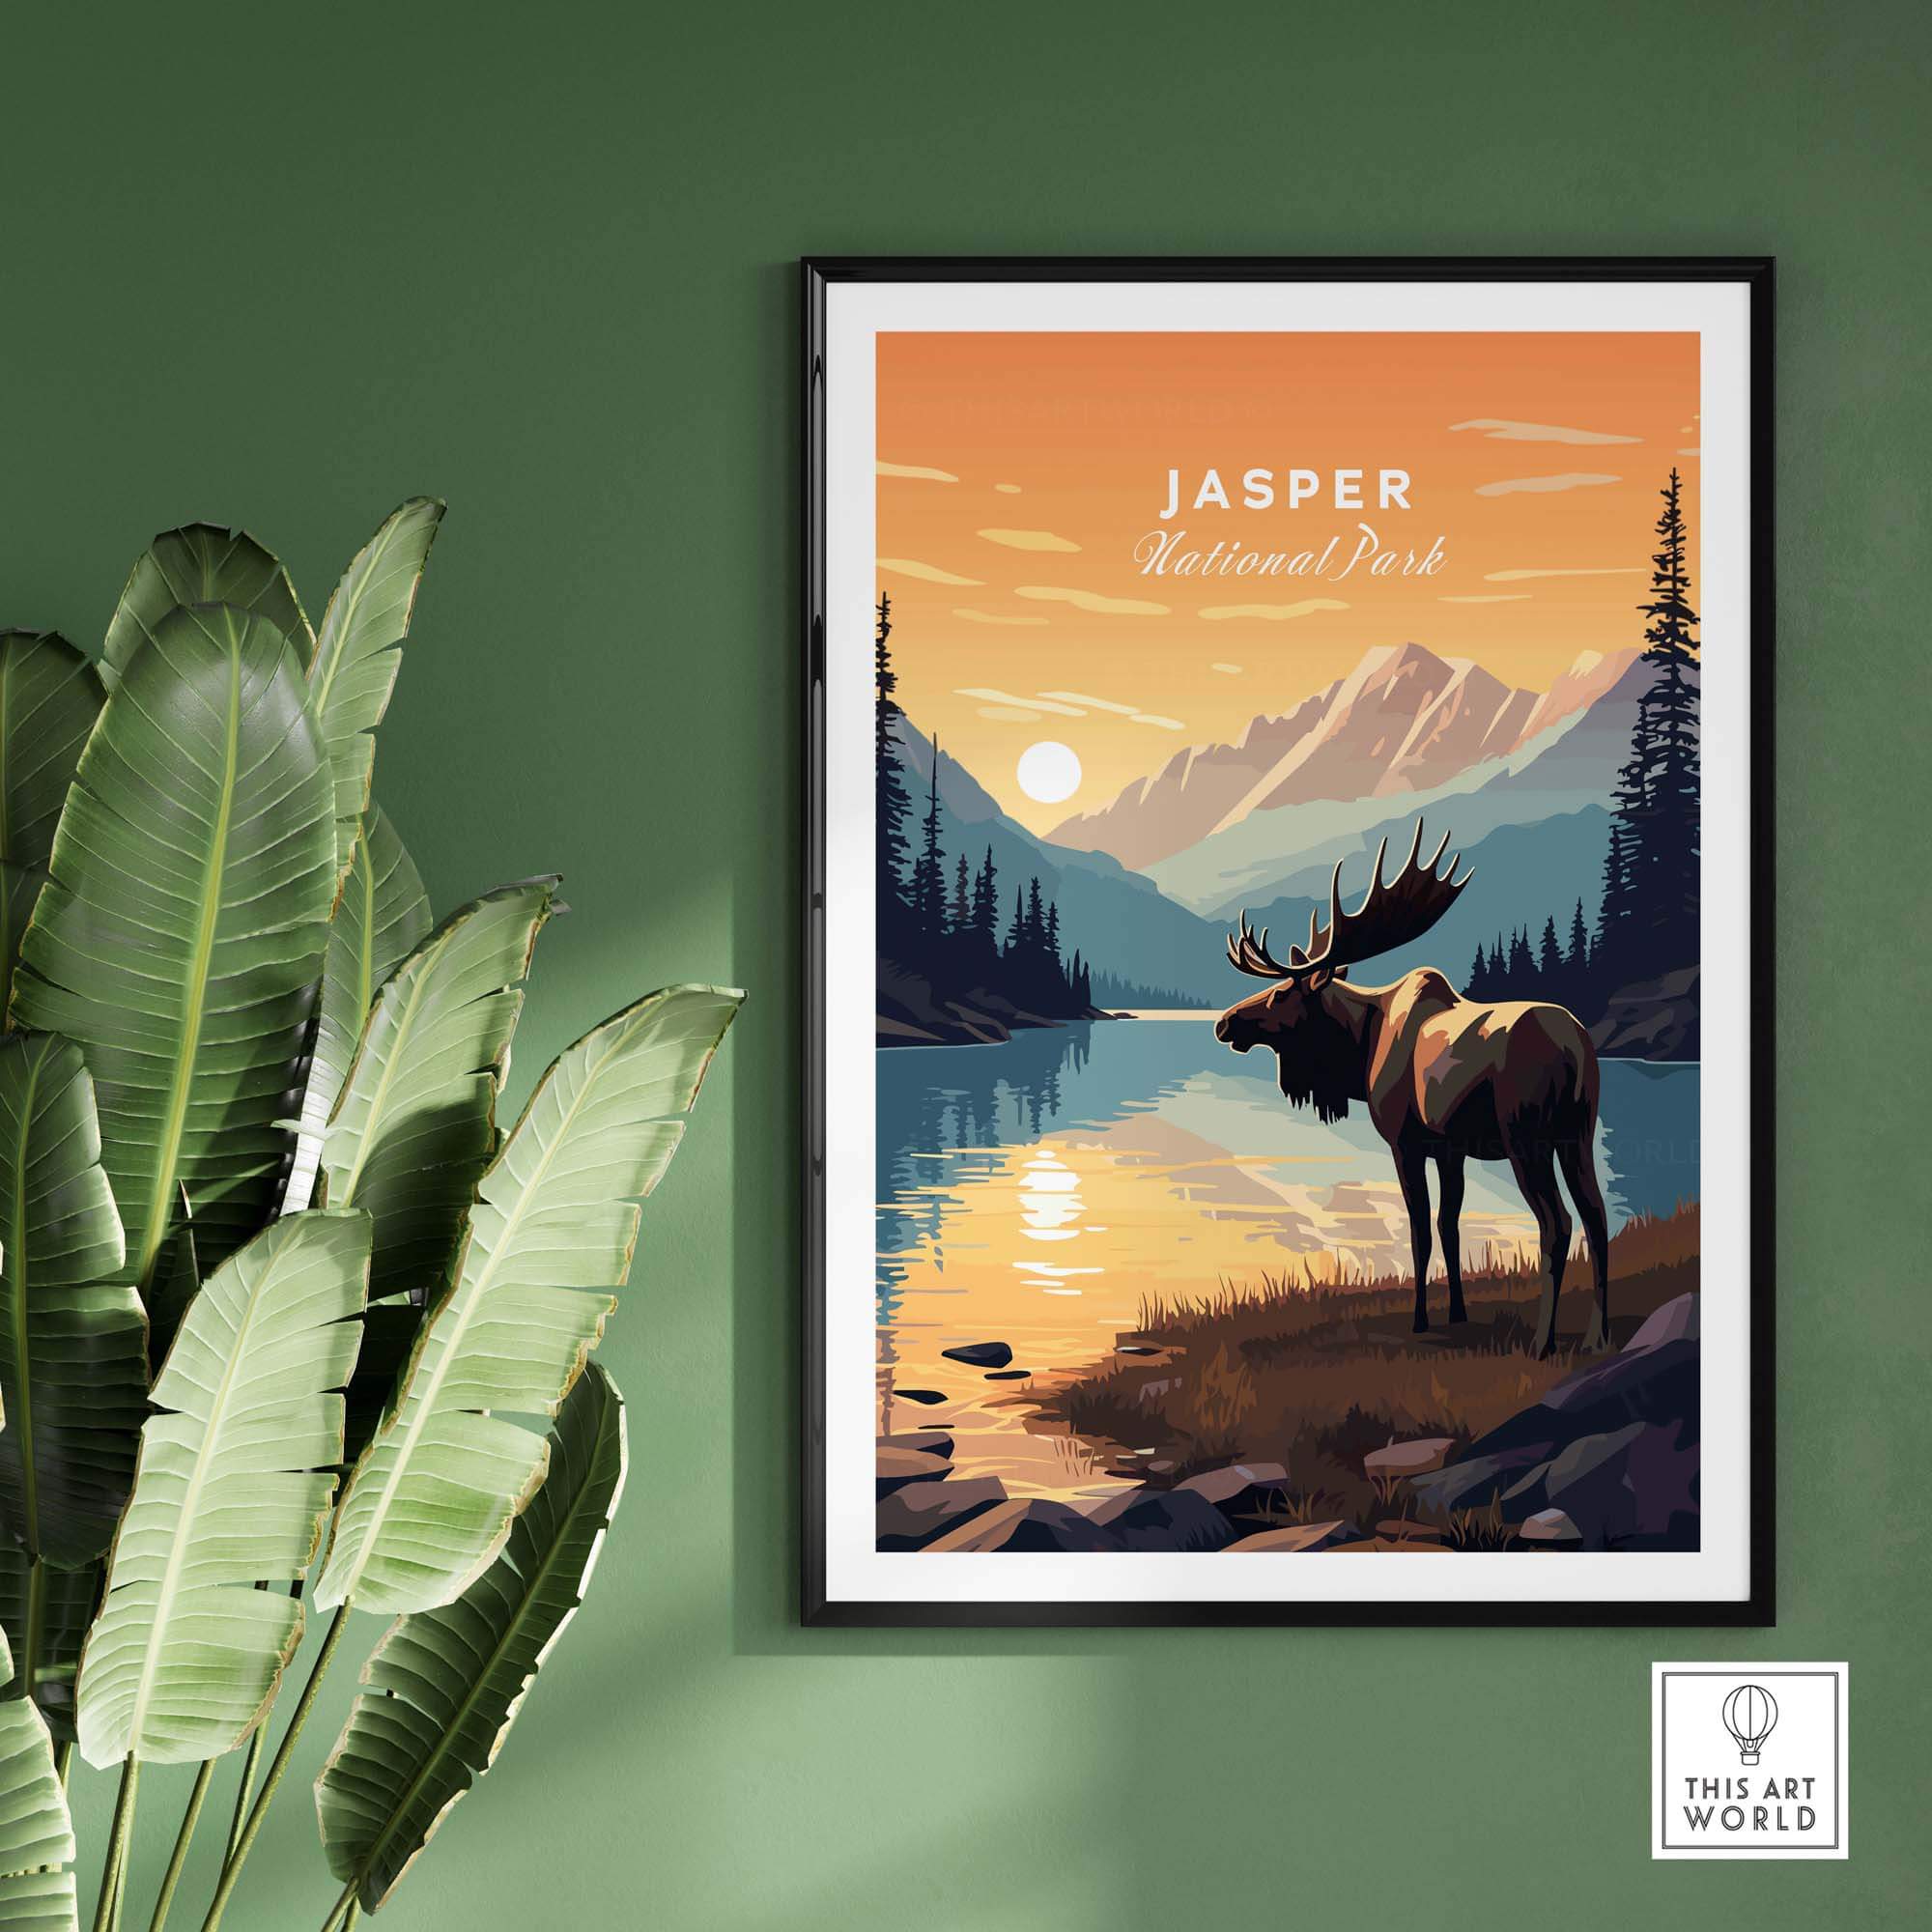 Jasper National Park Print featuring a moose in a black frame on a green well. 